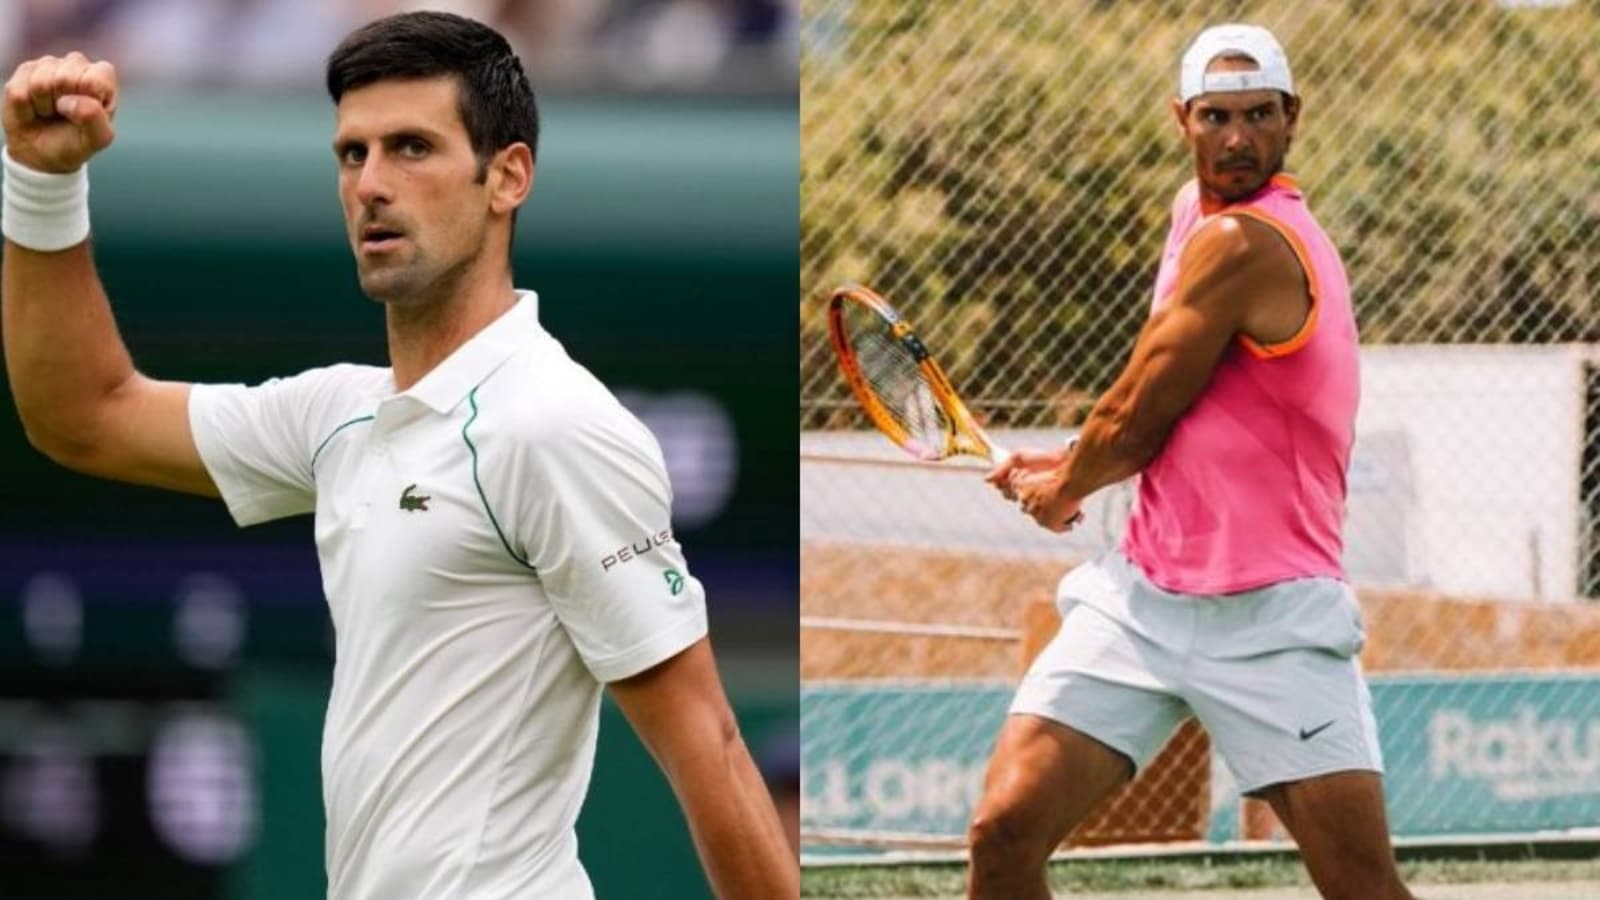 Novak Djokovic joins Rafael Nadal in pre-Wimbledon tournament; Andy Murray likely to play